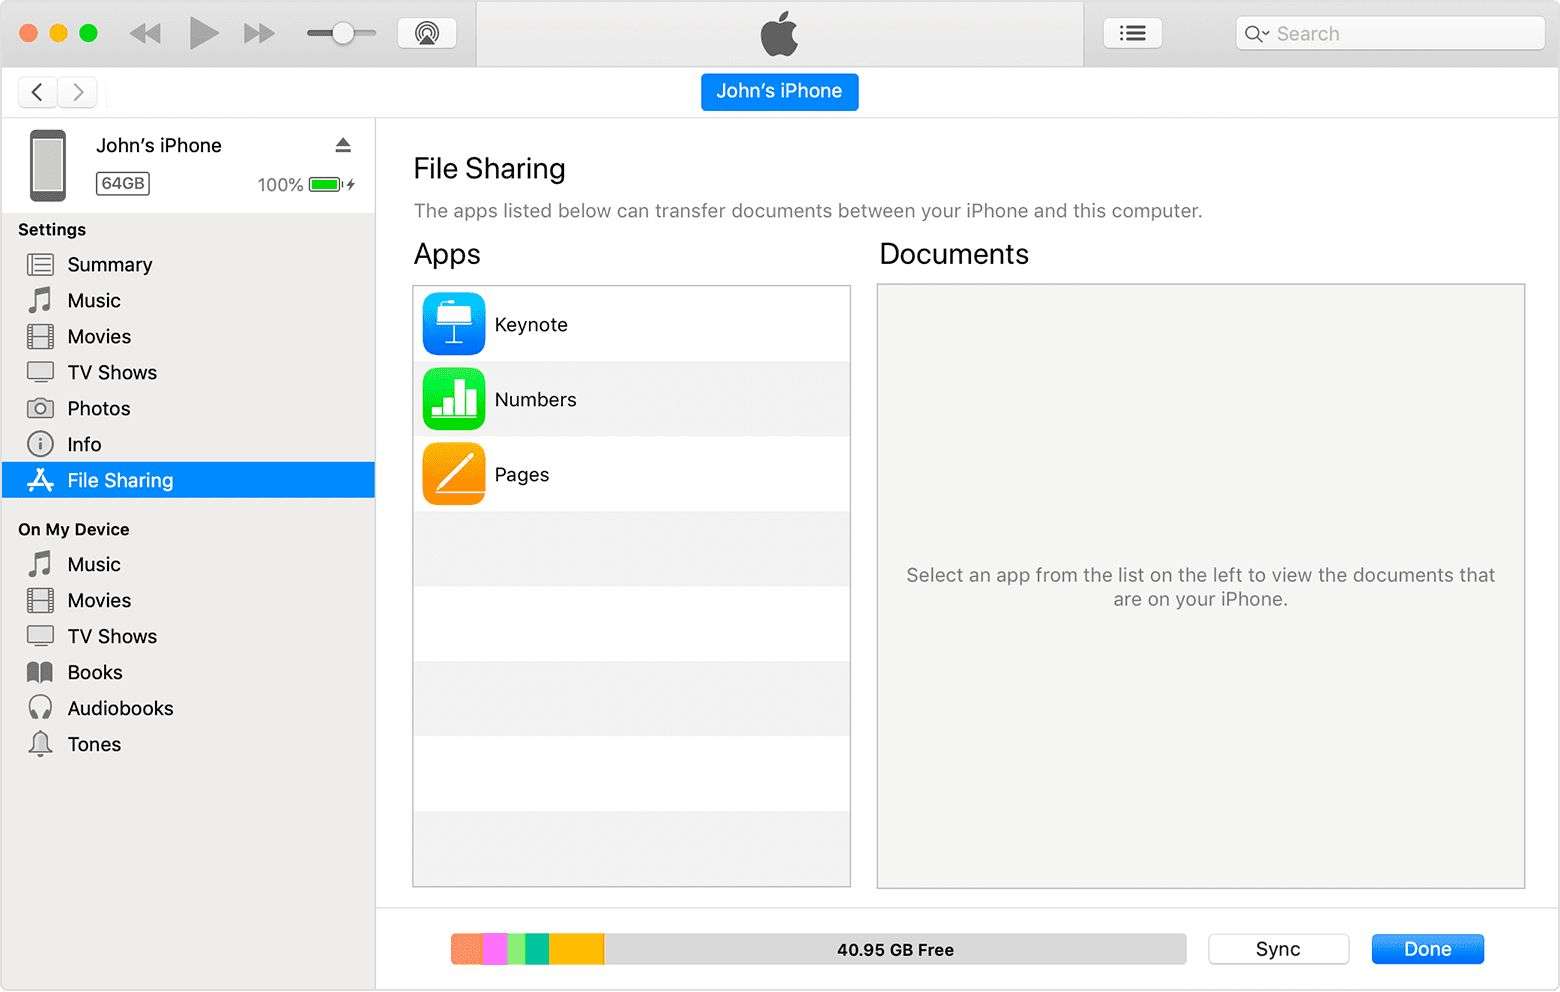 file sharing option on iTunes